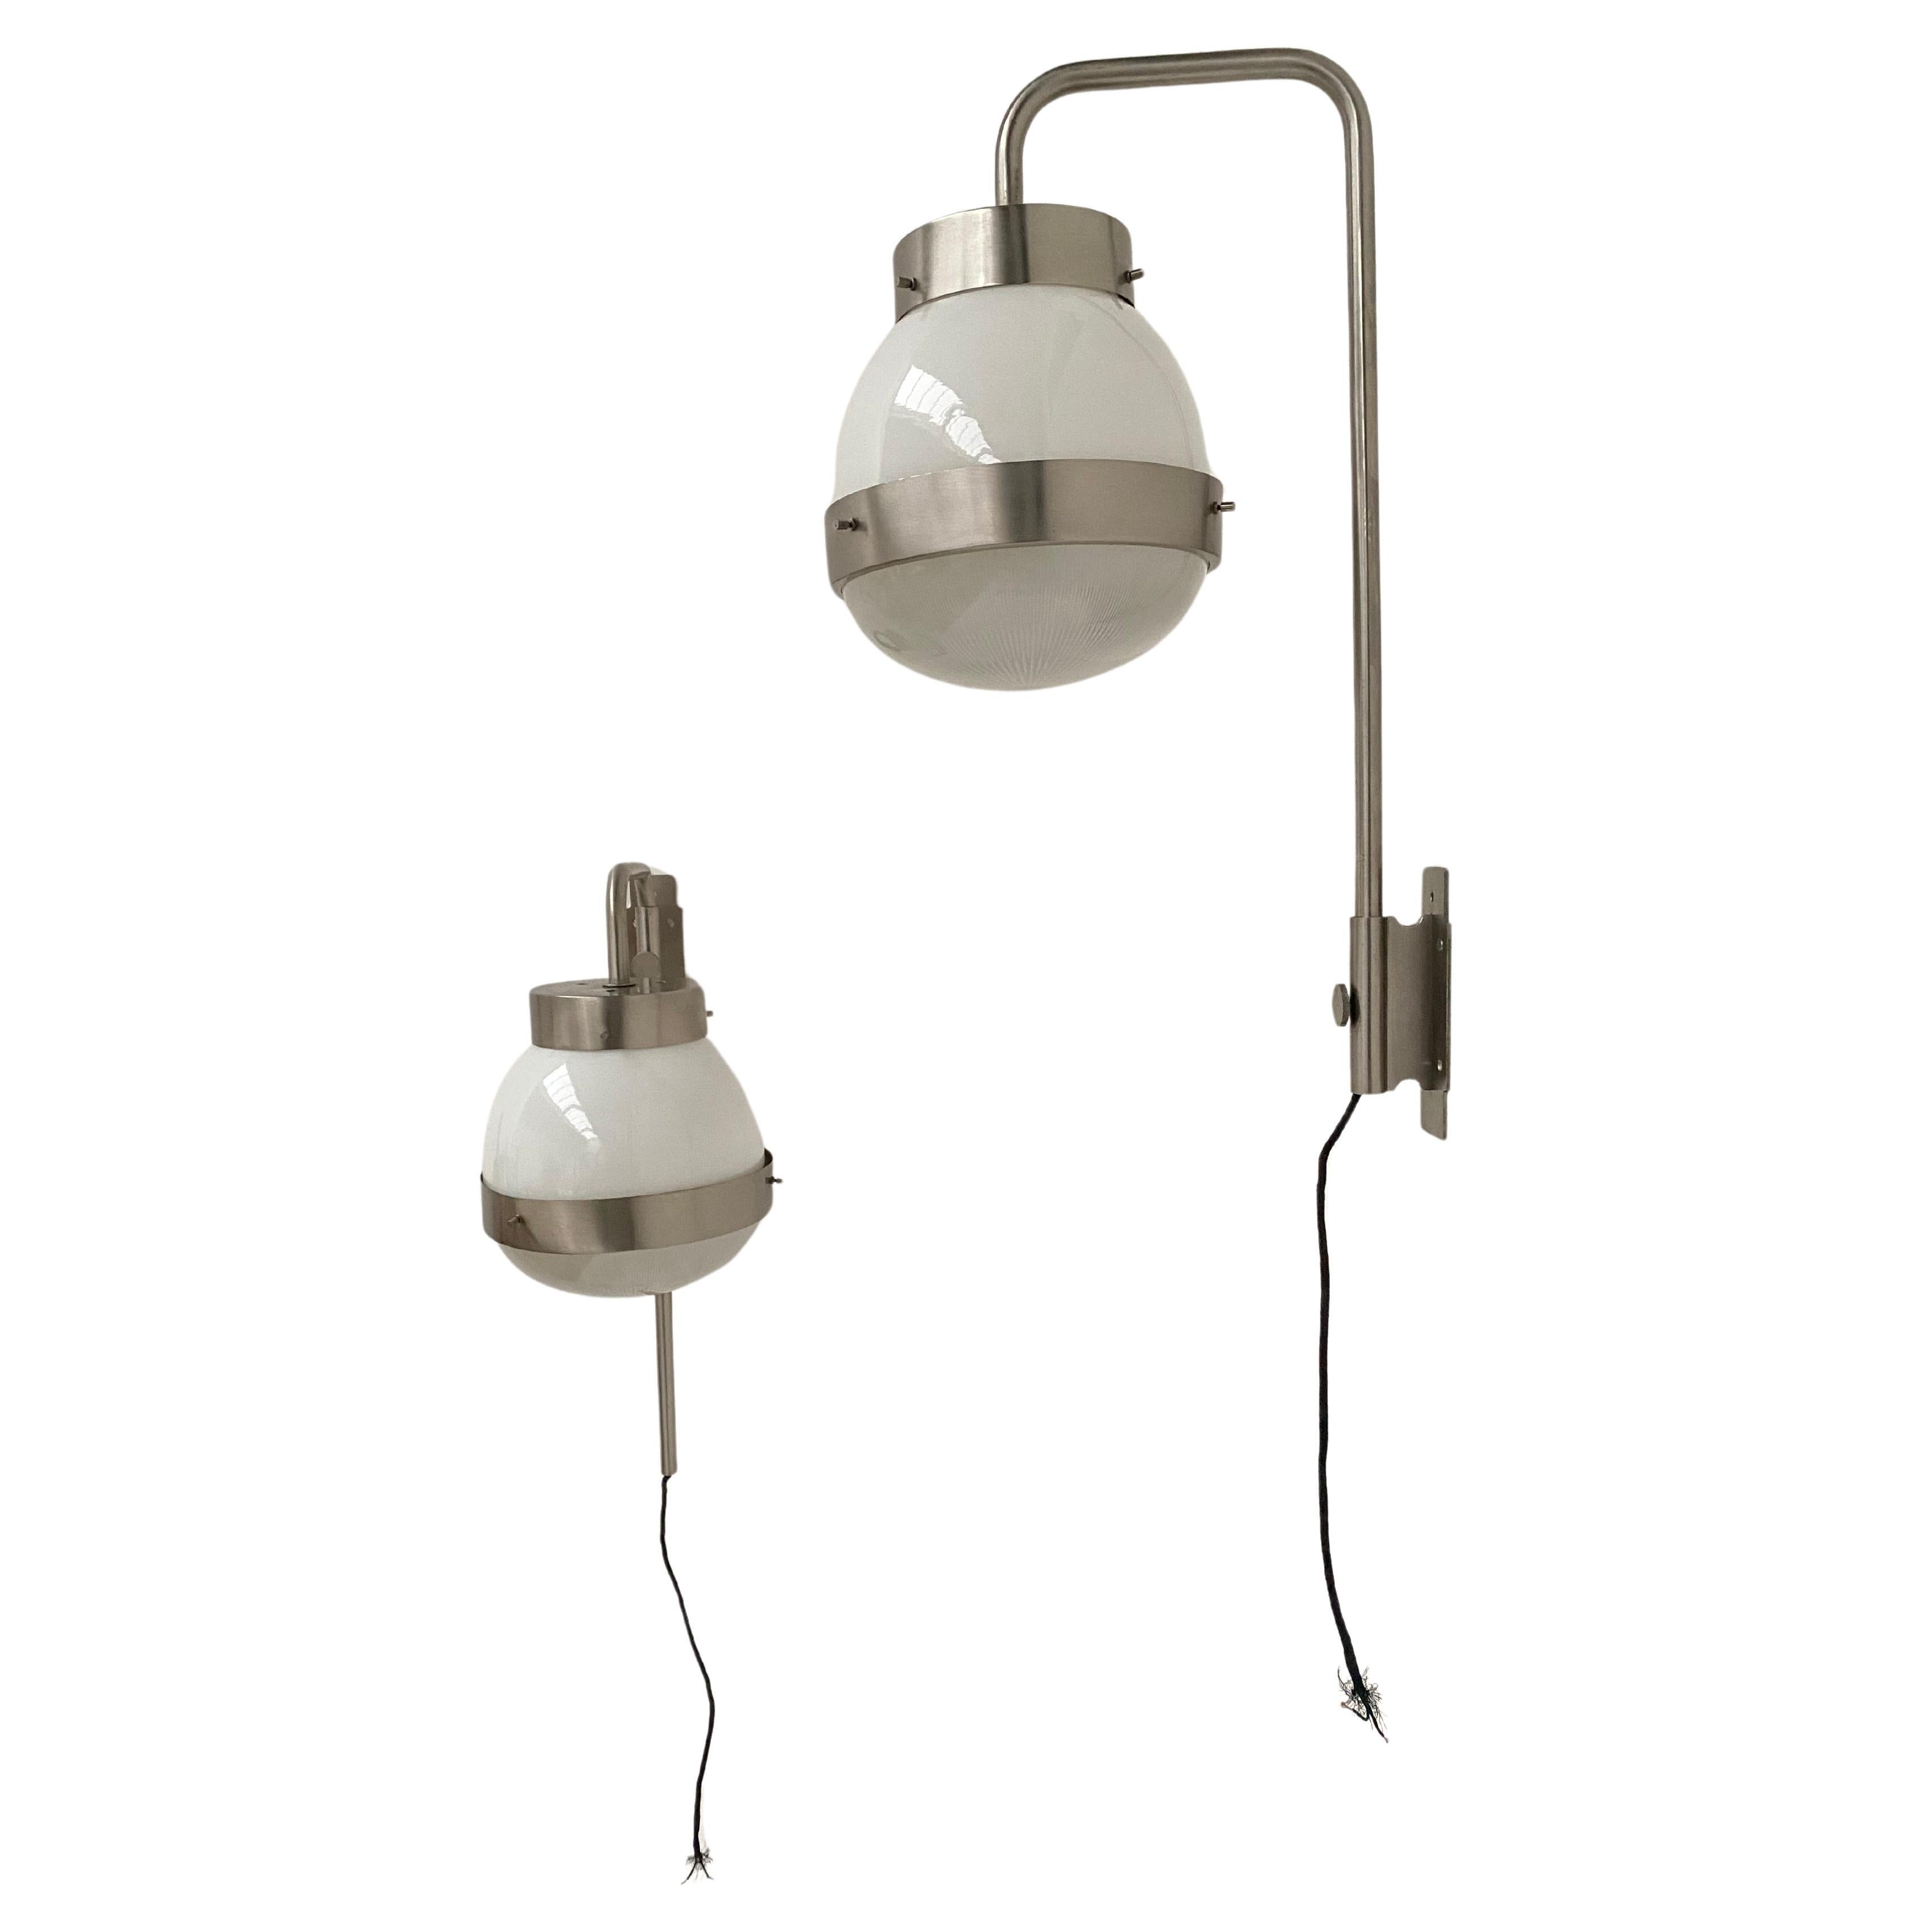 1960's produced 'Delta' Wall Sconces by Sergio Mazza for Artemide Italy 

Materials: Nickel plated brass, opaline diffused and pressed glass

Adjustable in height and they can swivel left to right  with the mounting plate with perfect engineered and